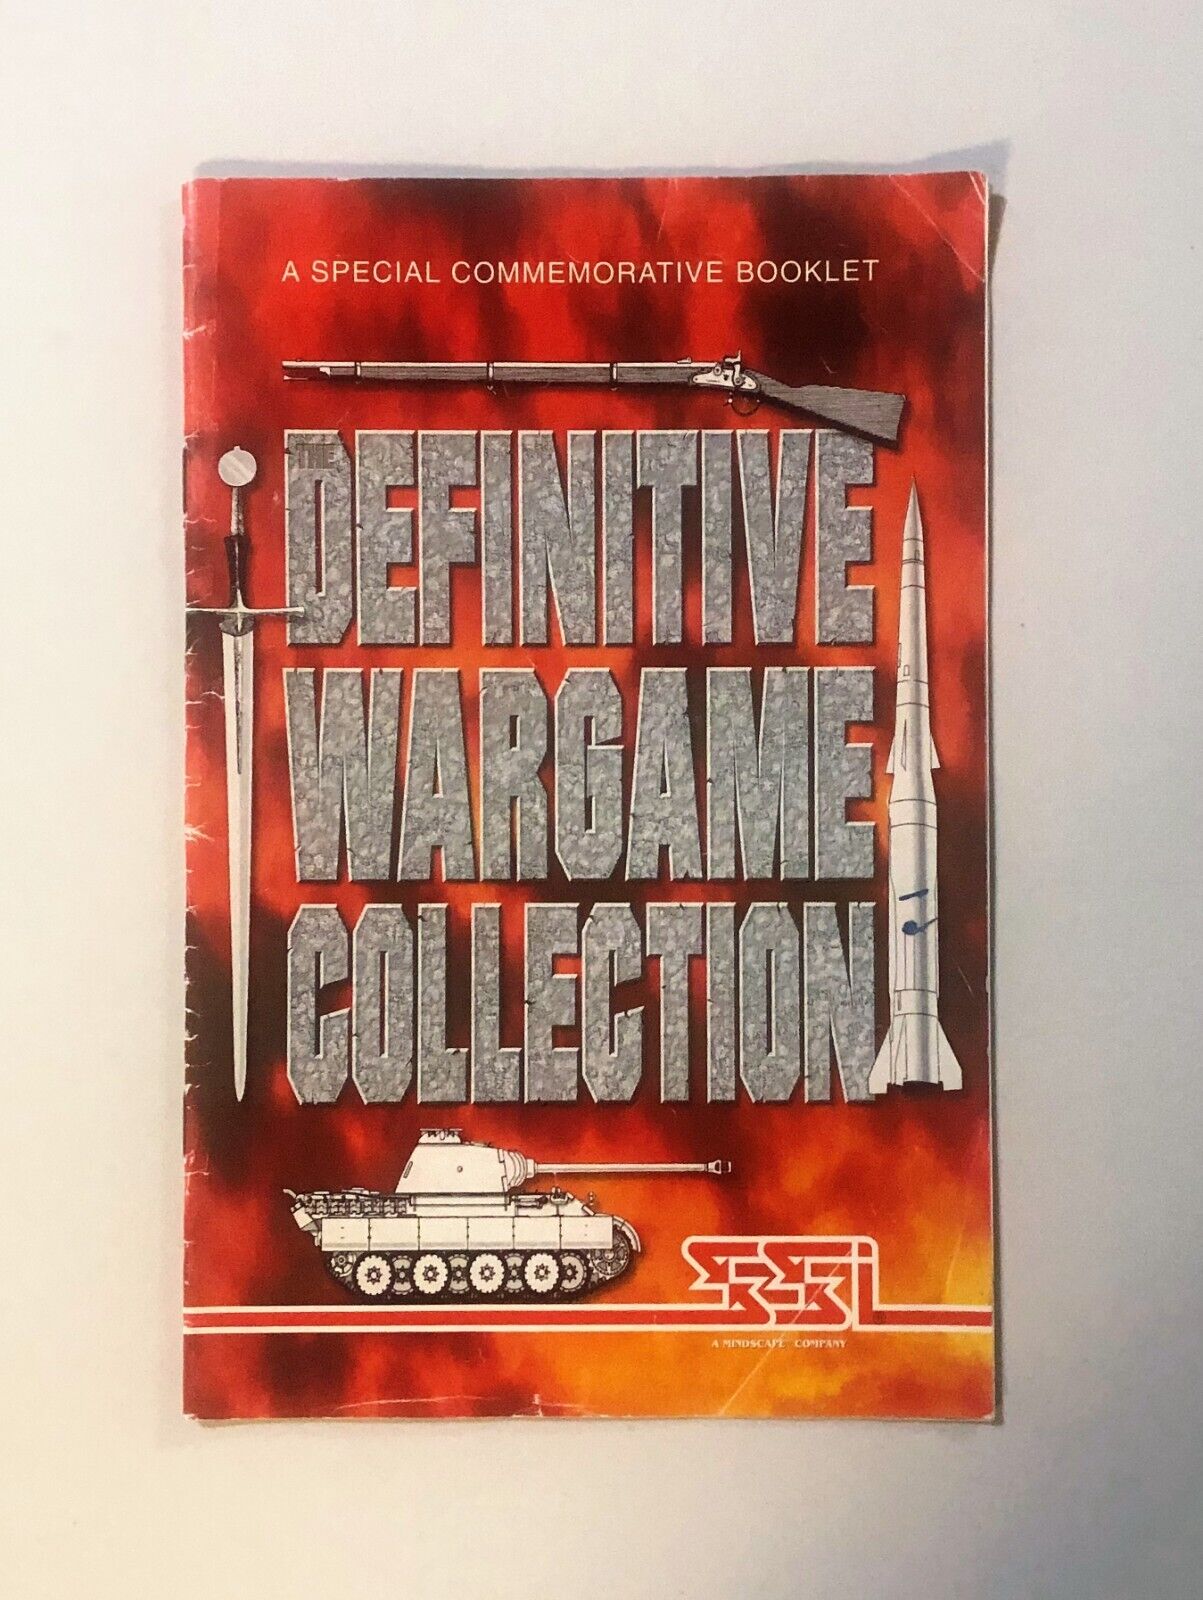 SSI Definitive Wargame Collection Commemorative Booklet 1995